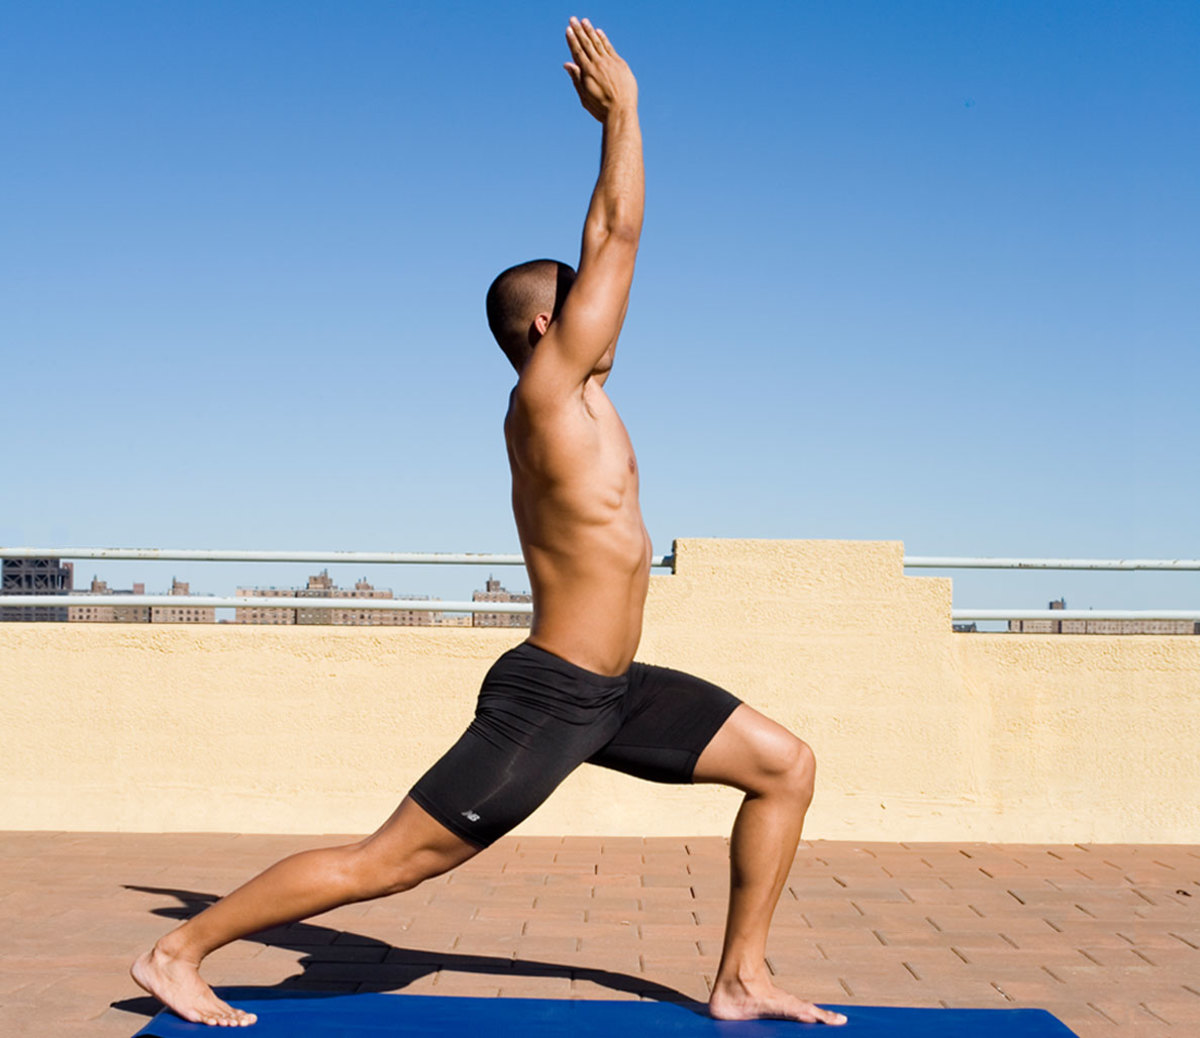 Yoga pose male Images - Search Images on Everypixel